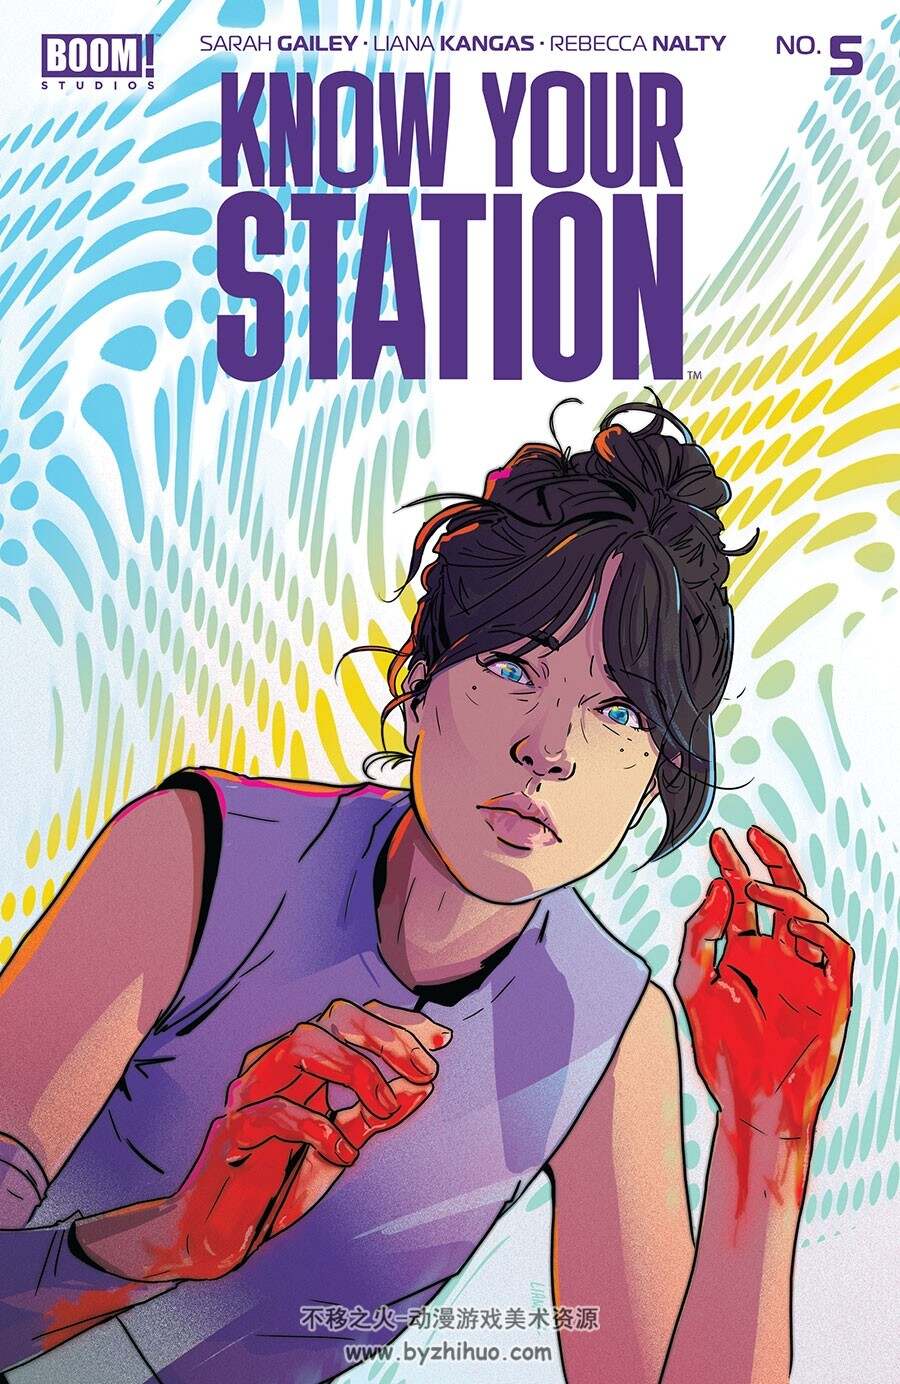 Know Your Station 第5册 Sarah Gailey 漫画下载